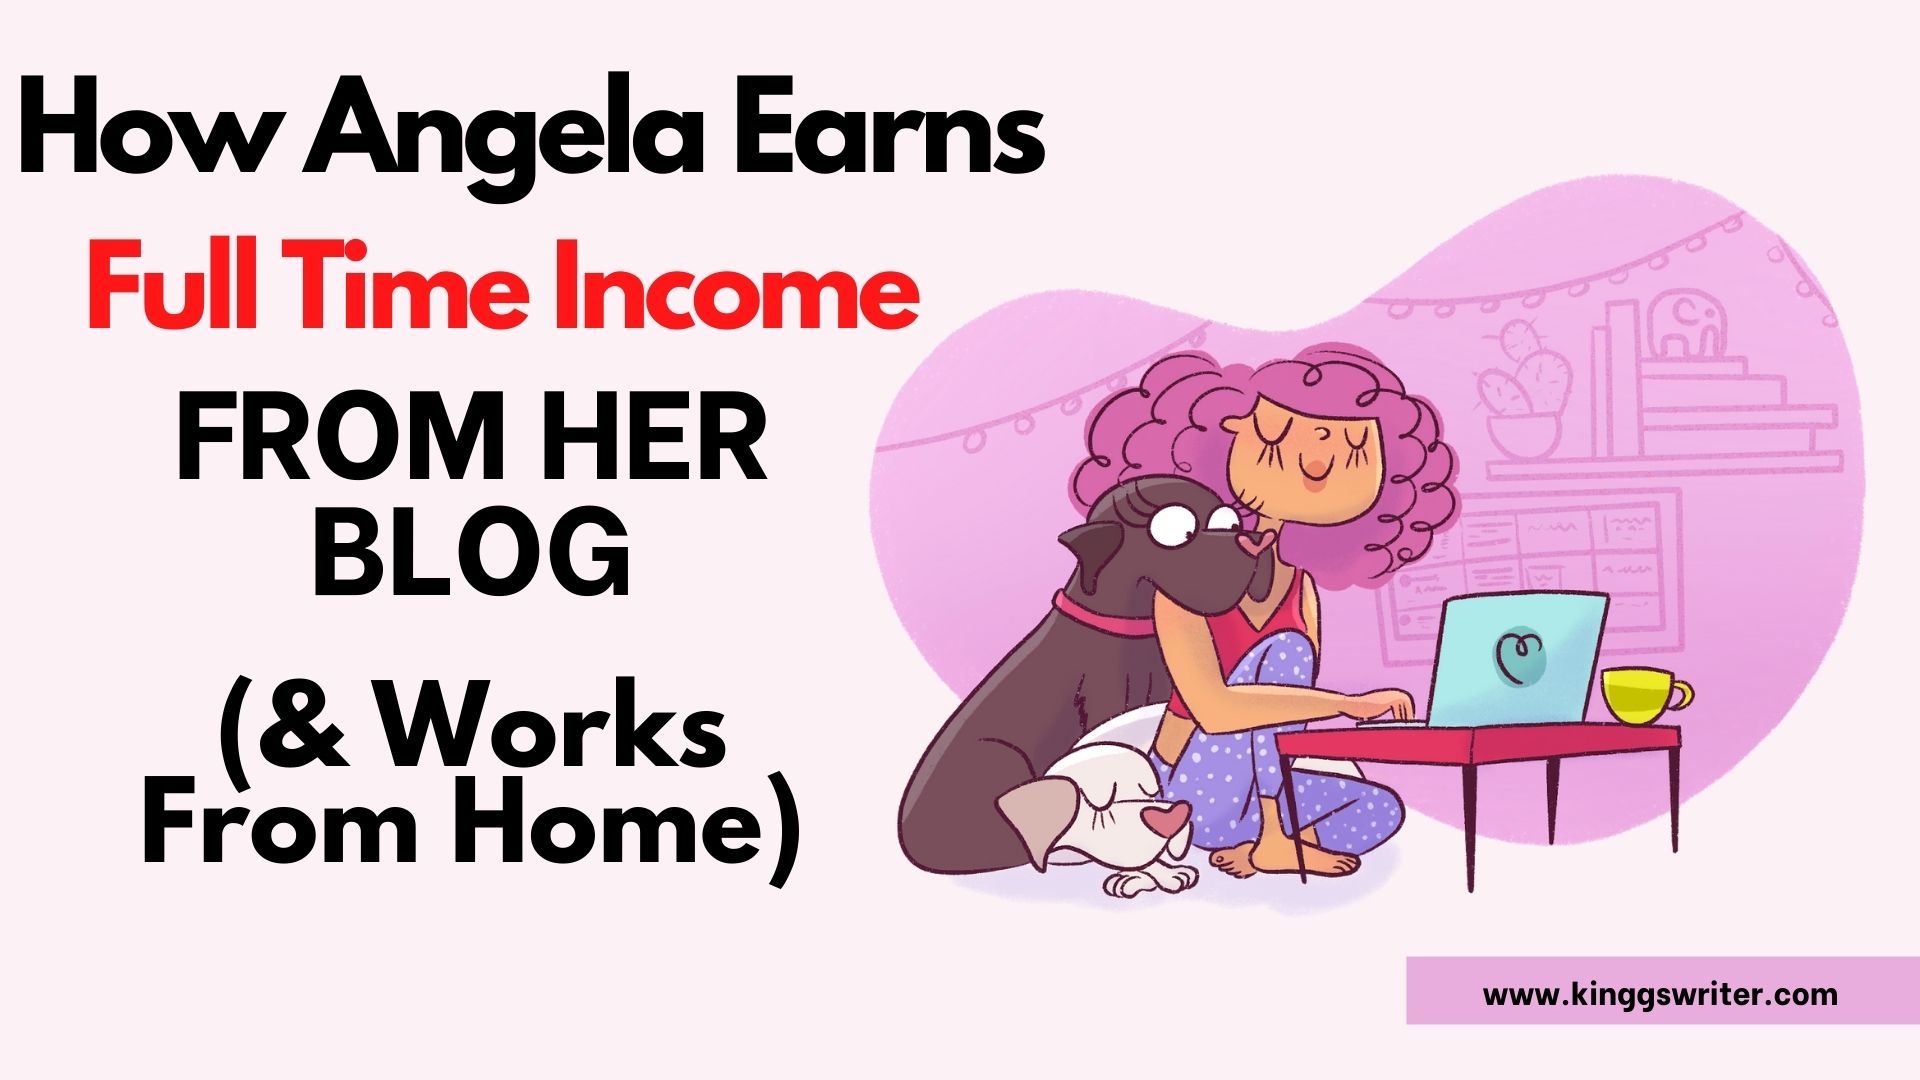 How Angela Makes Full Time Income From Blogging